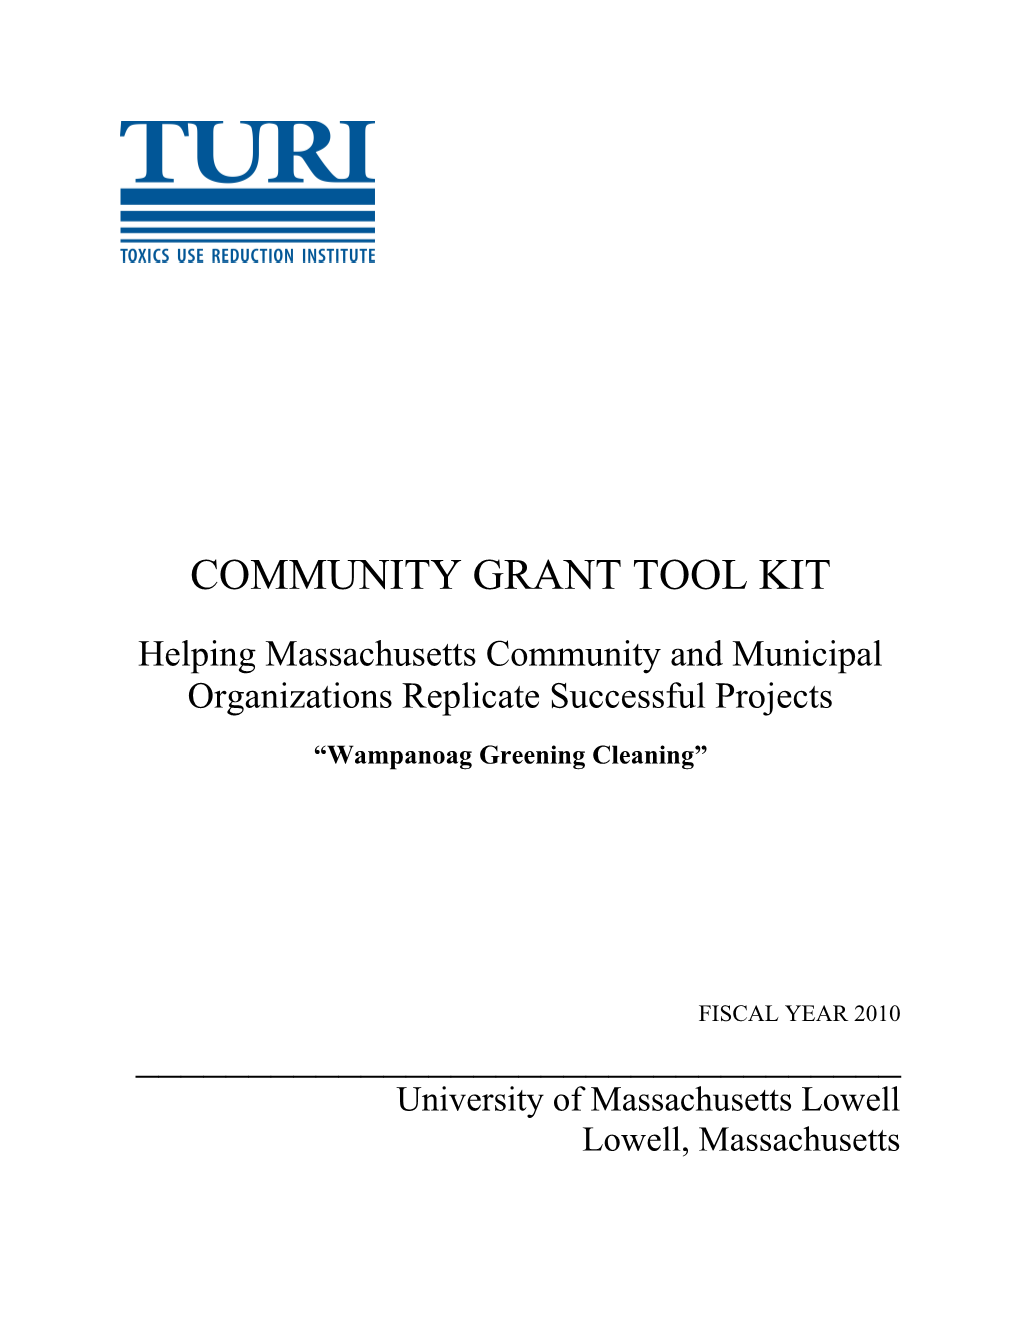 Toxics Use Reduction Networking (Turn) Grant Program Application